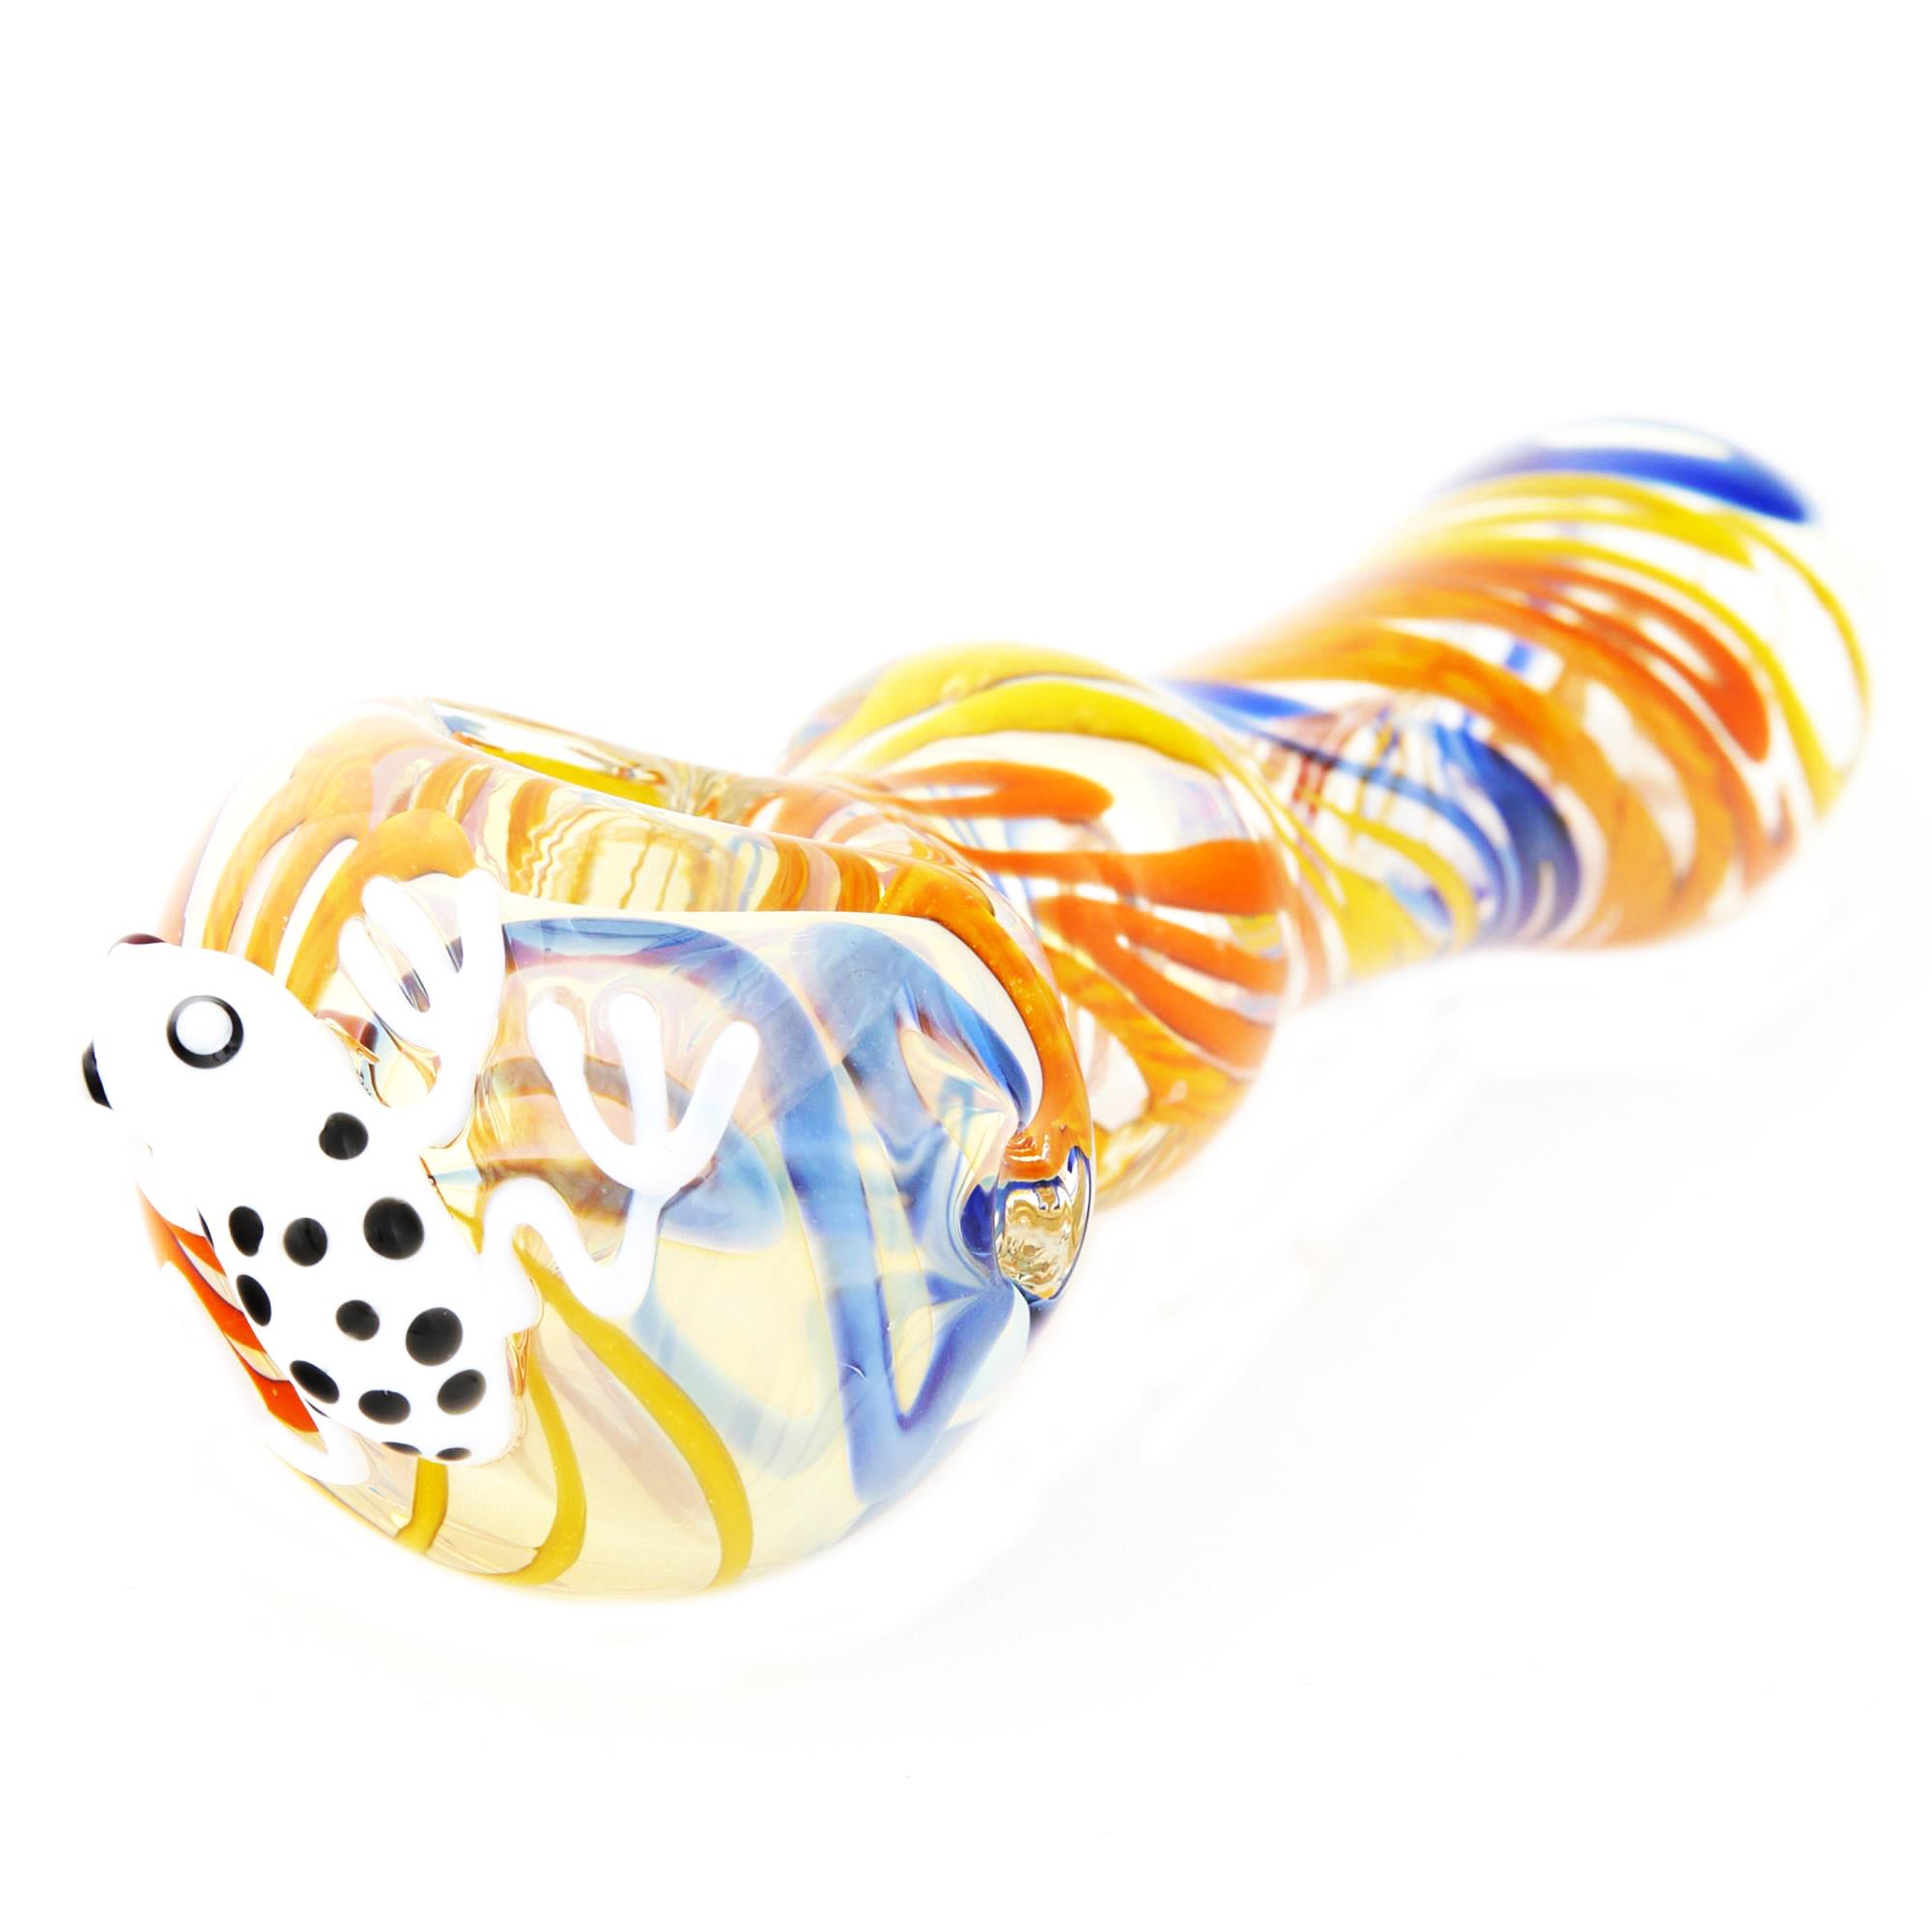 HIGH FROG SPOON PIPE